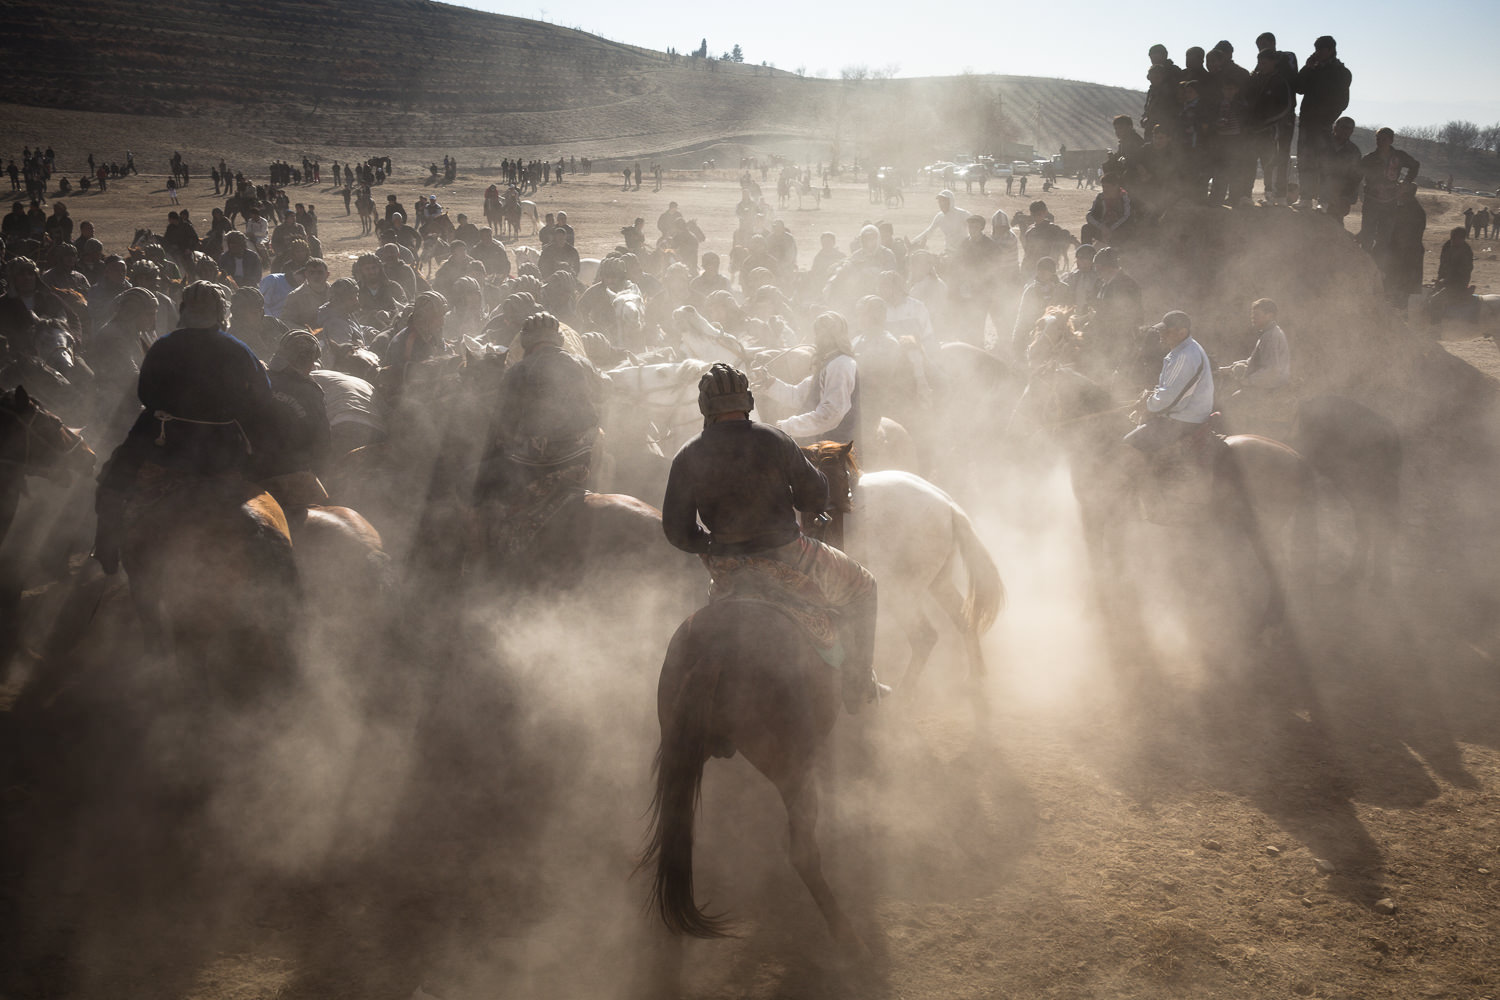  Sunlight and dust streams around Buzkashi players in Sharinav, Tajikistan. Spectators stand on a mound nearby - audience members often wander as close as possible to watch the game. 